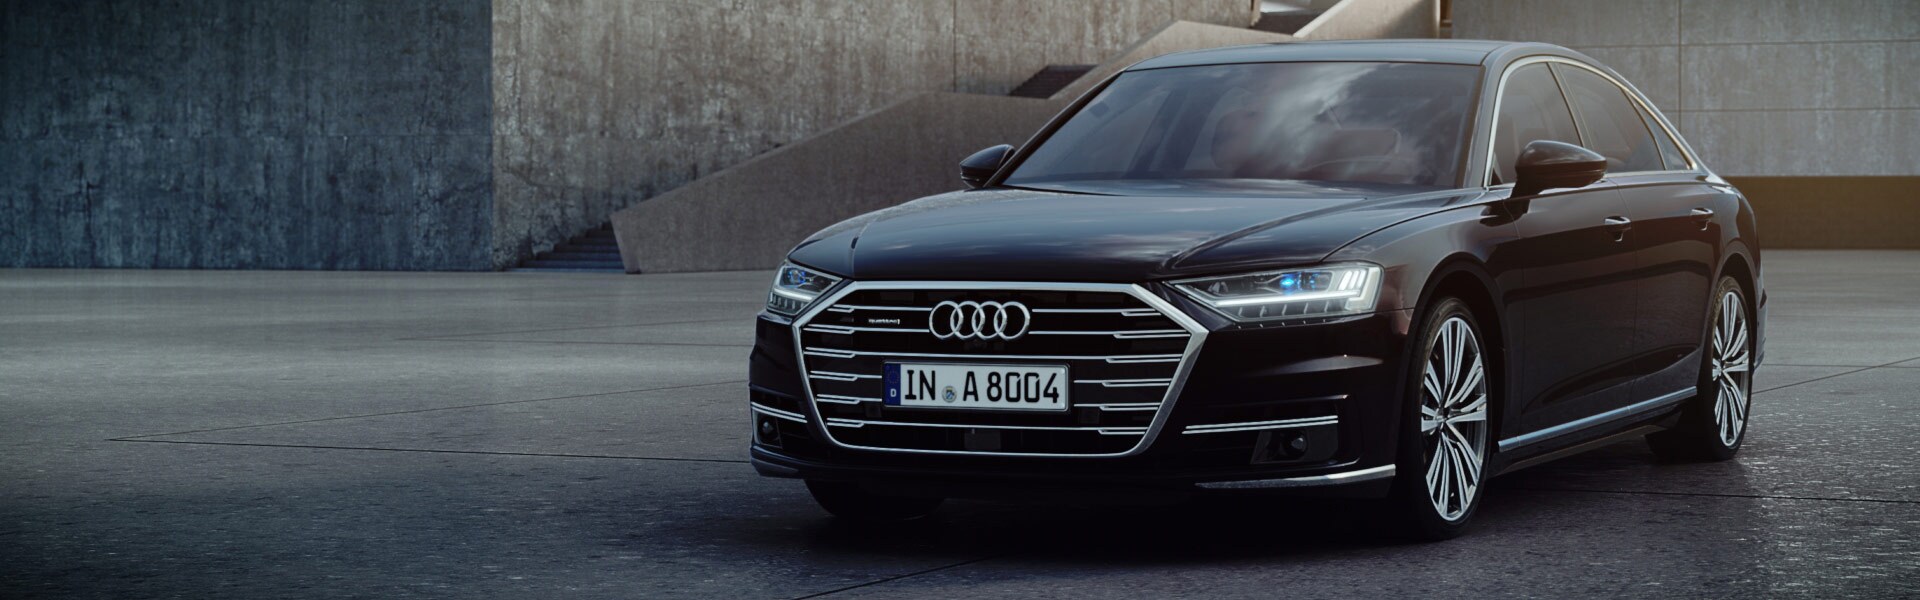 The new Audi A8